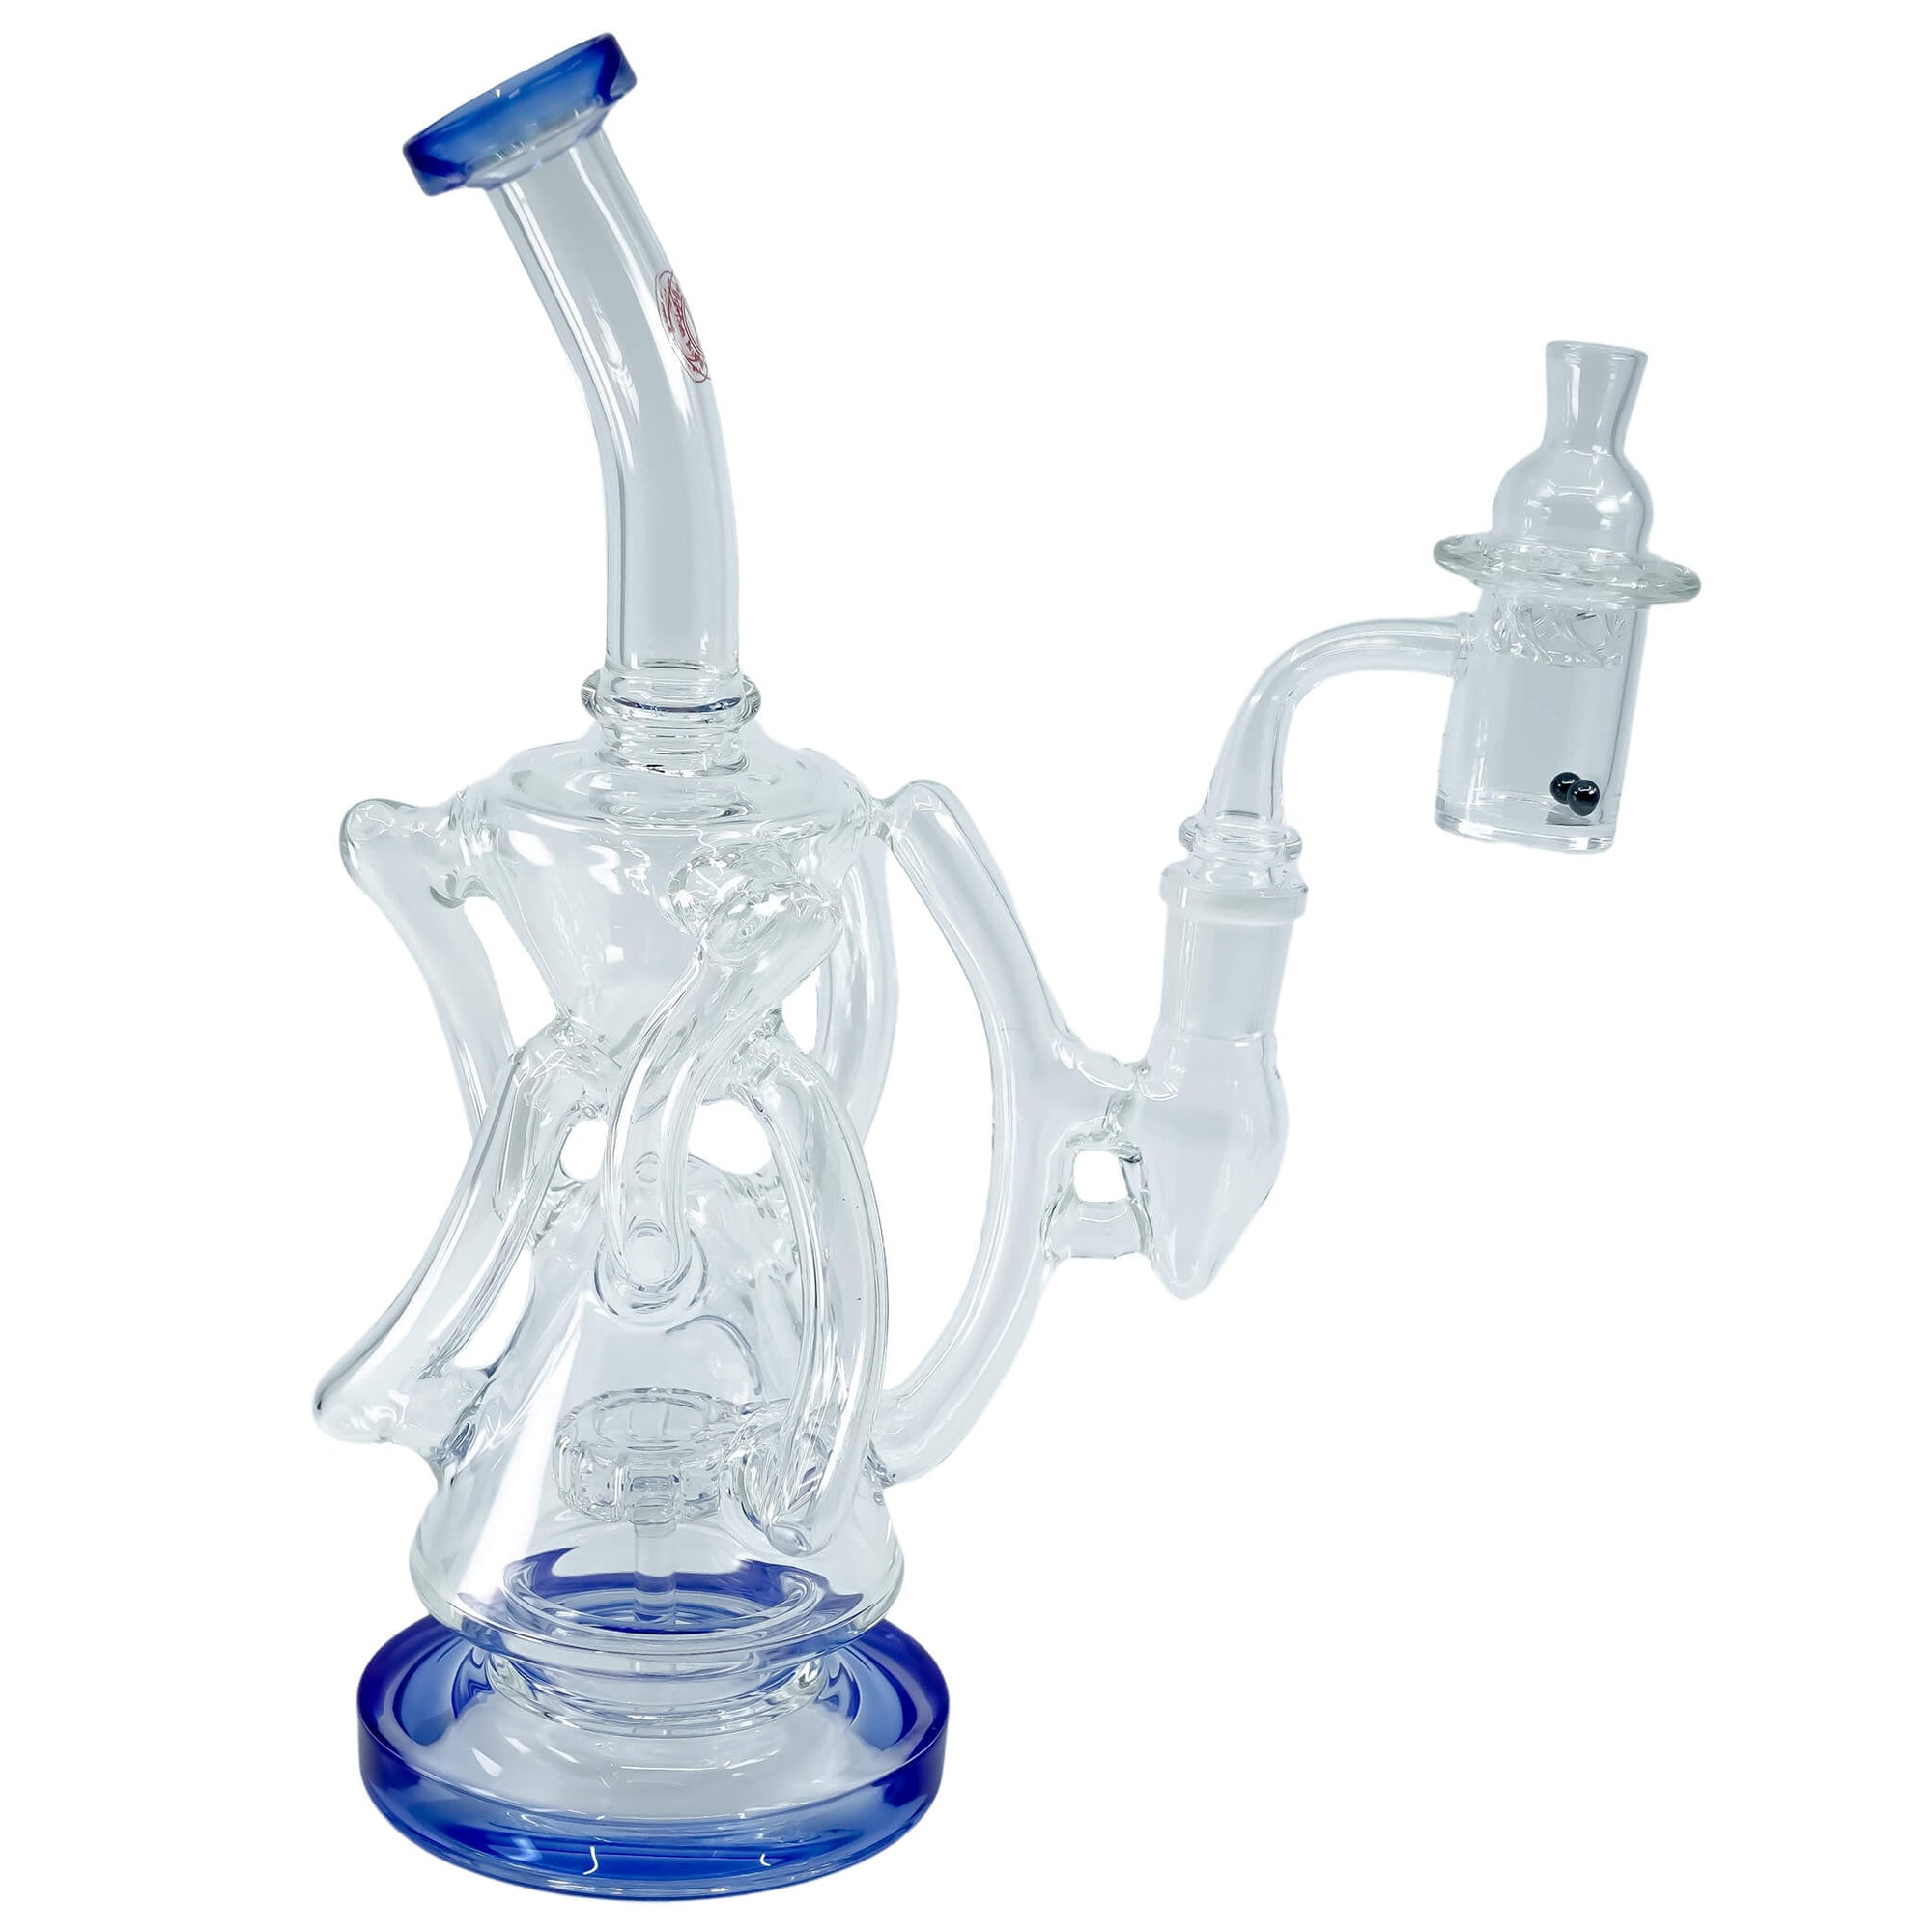 Trifecta 25mm Handmade Joint Complete Dabbing Kit #1 | Blue With Blue Crystal Pearls View | DW